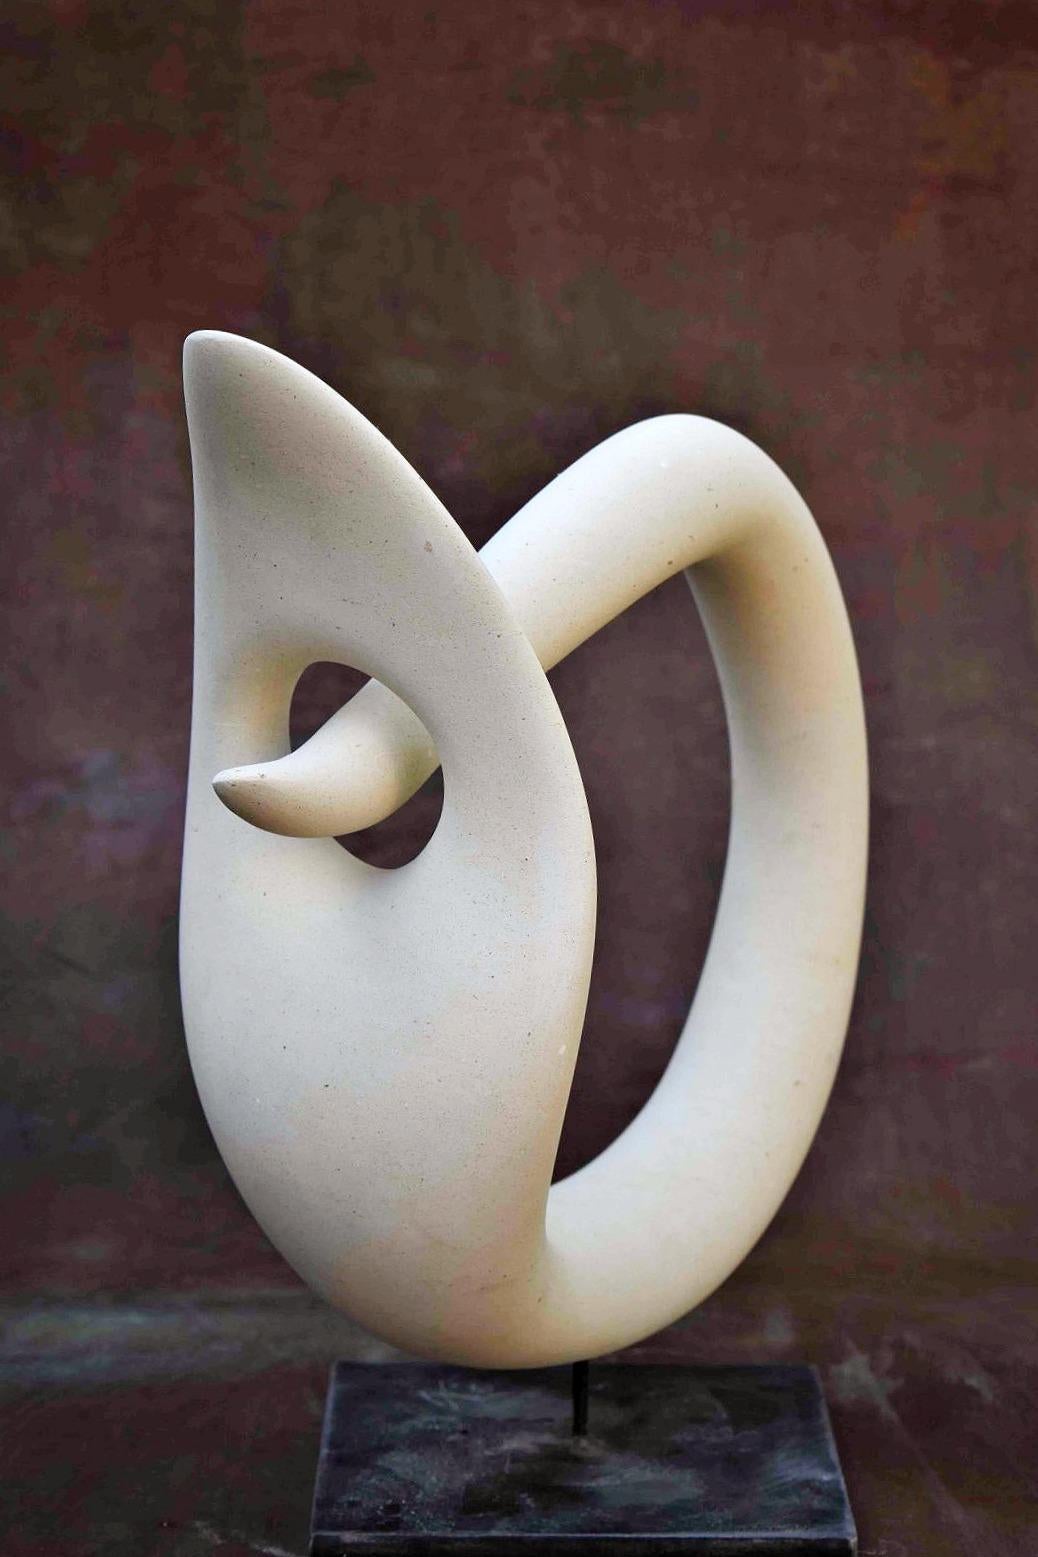 21st Century Abstract Sculpture ERMA by Renzo Buttazzo from Italy

Sculpture in Lecce Stone
Delivered with a certificate of authenticity (dated & signed)
Contact us on 1stDibs to acquire a different size.

Since 1886 Renzo Buttazzo work with Pietra